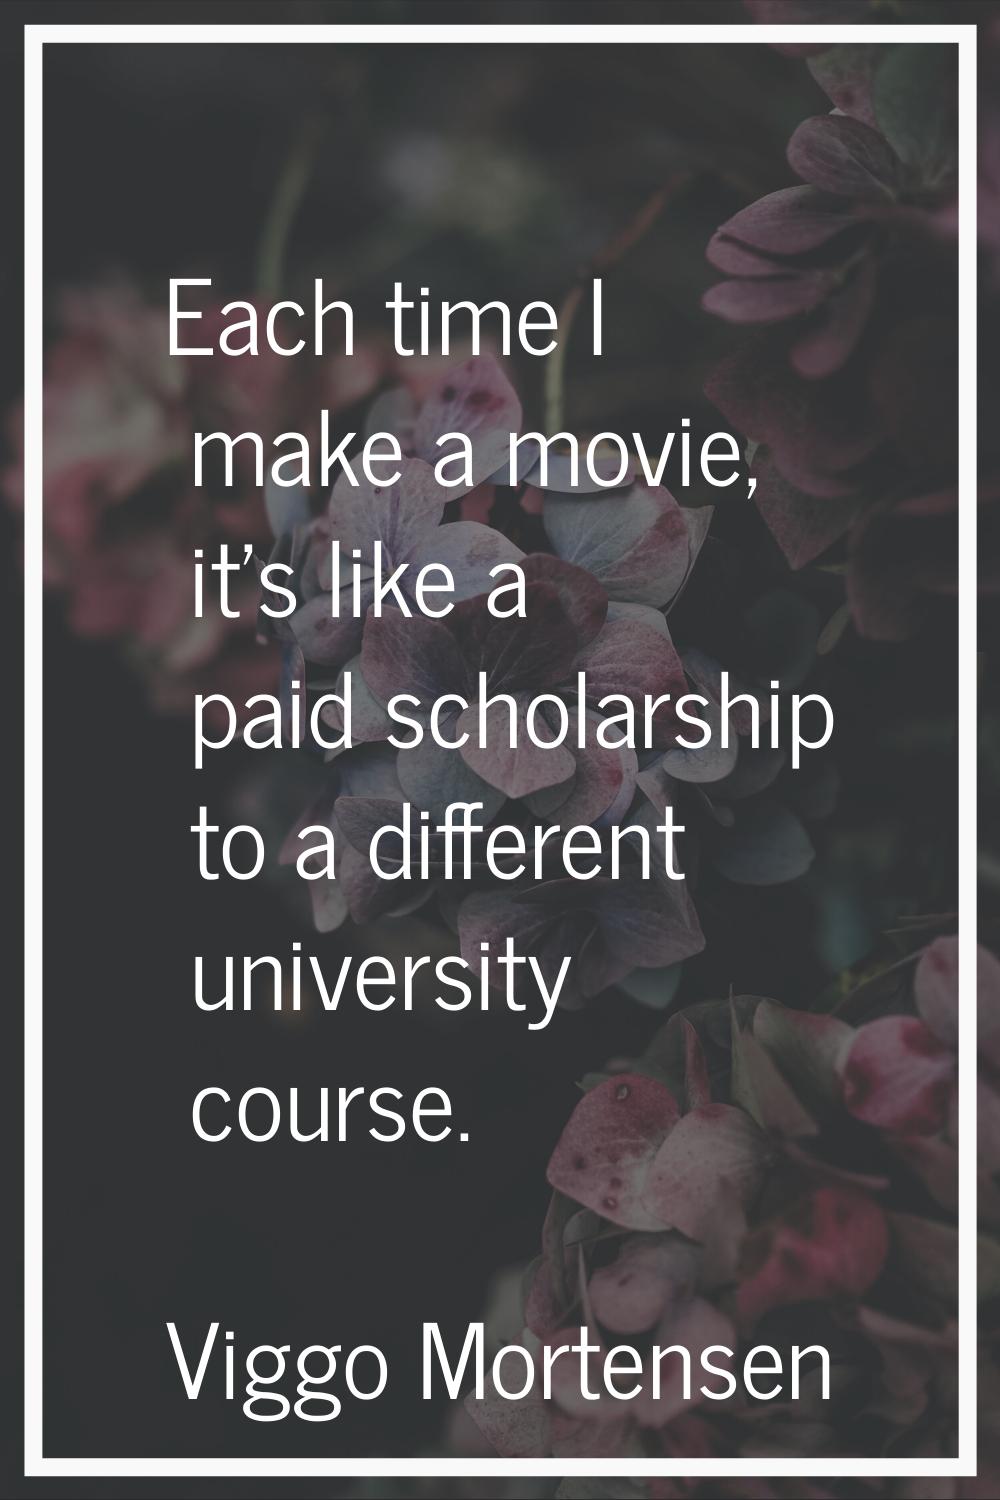 Each time I make a movie, it's like a paid scholarship to a different university course.